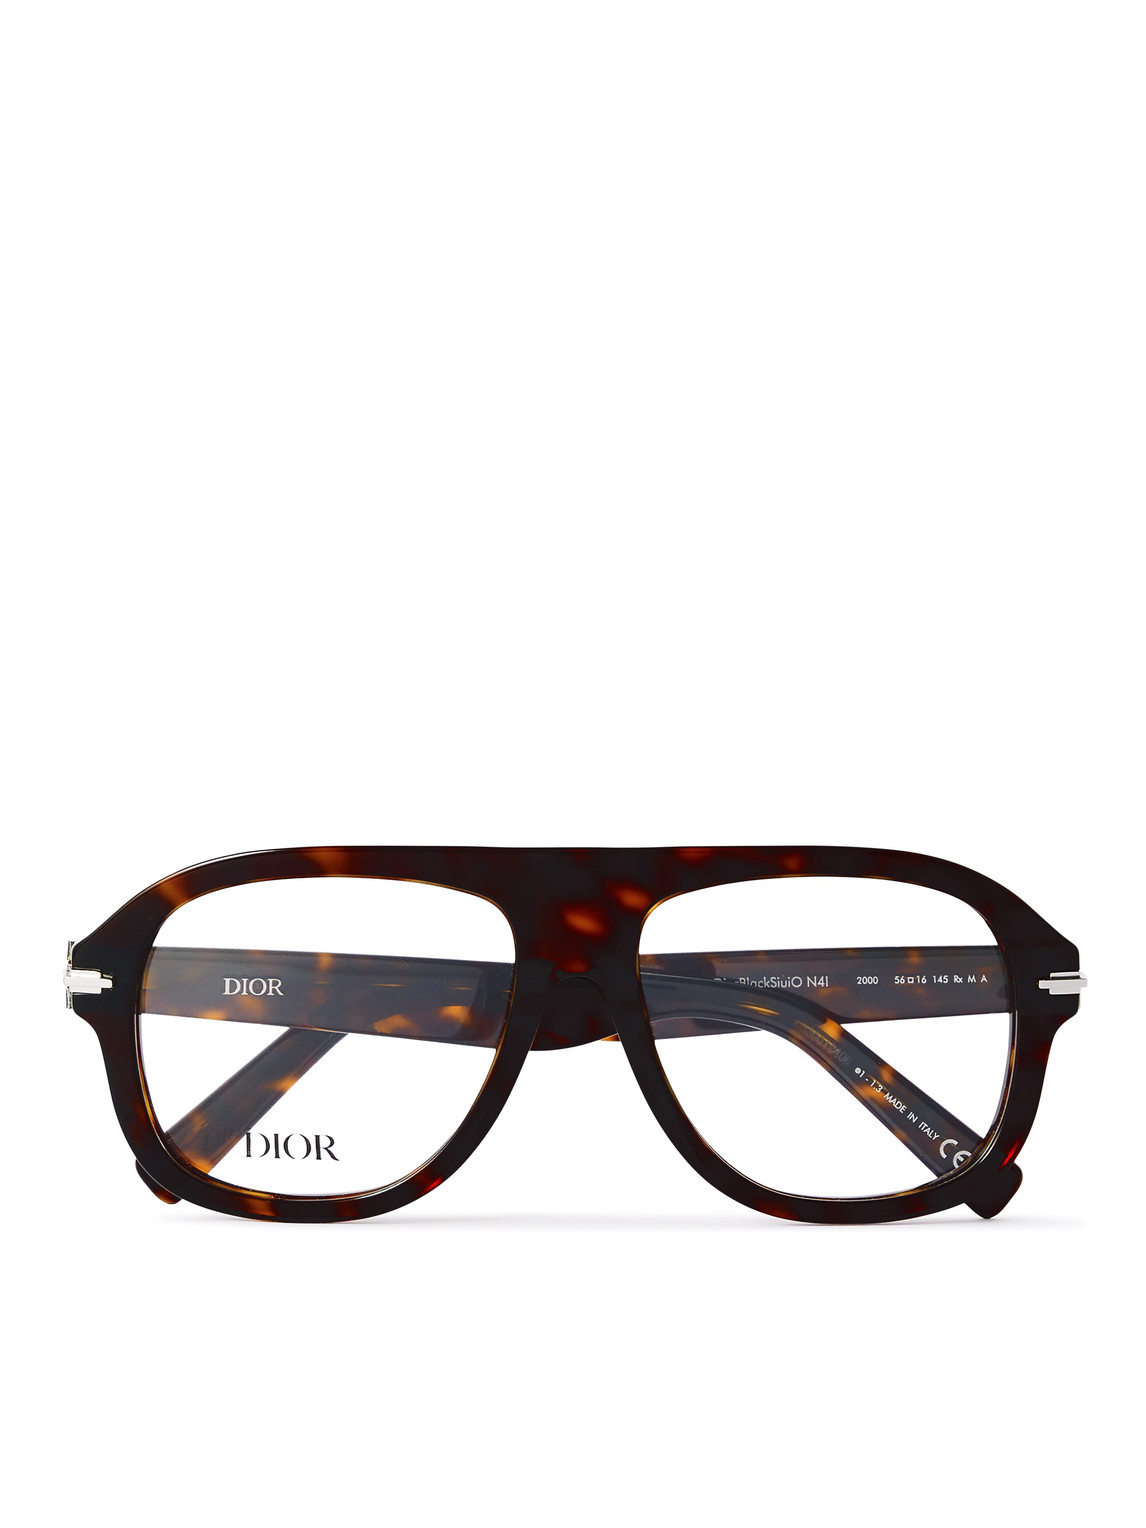 Dior Blacksuit Tortoiseshell Acetate And Silver-tone Aviator-style Optical Glasses In Brown